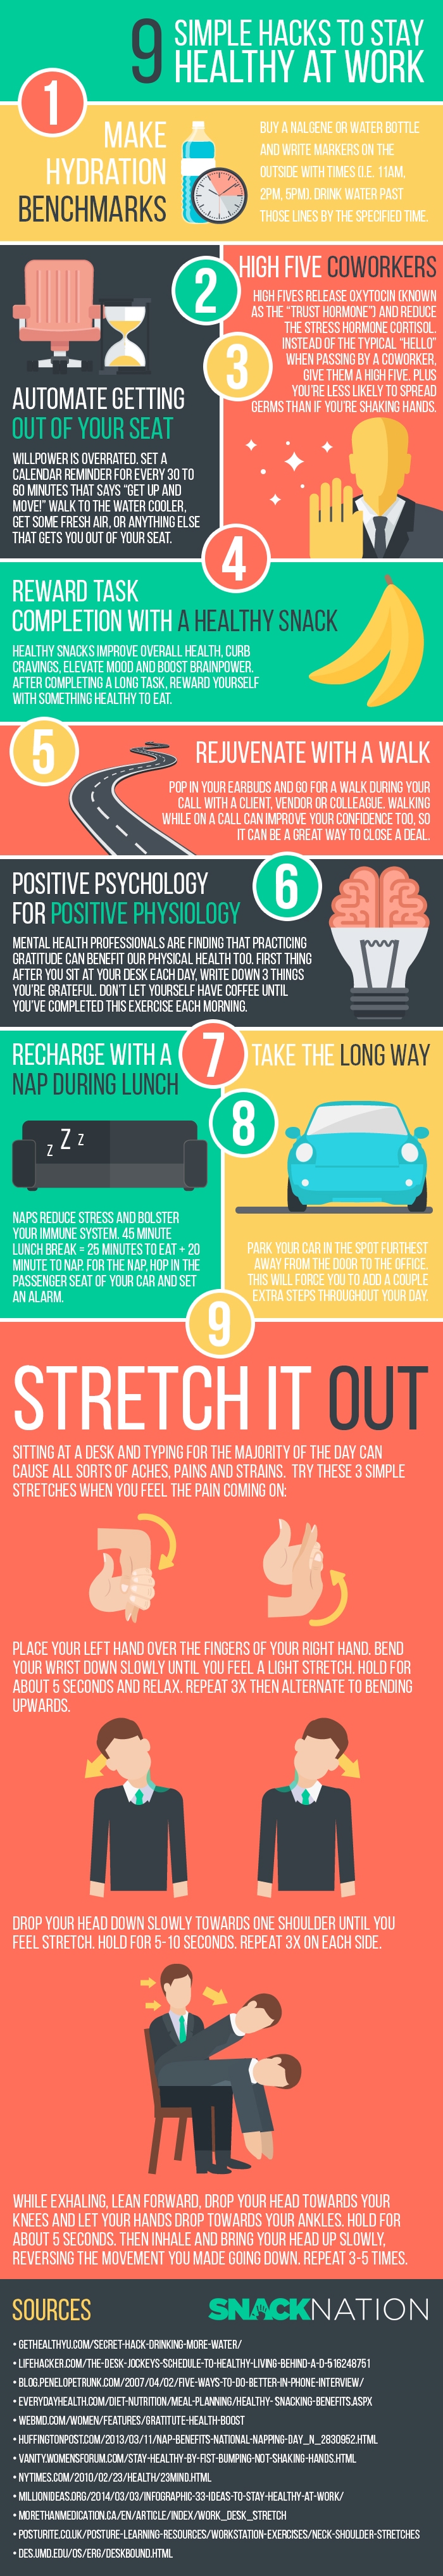 9-simple-hacks-to-stay-healthy-at-work-infographic-min